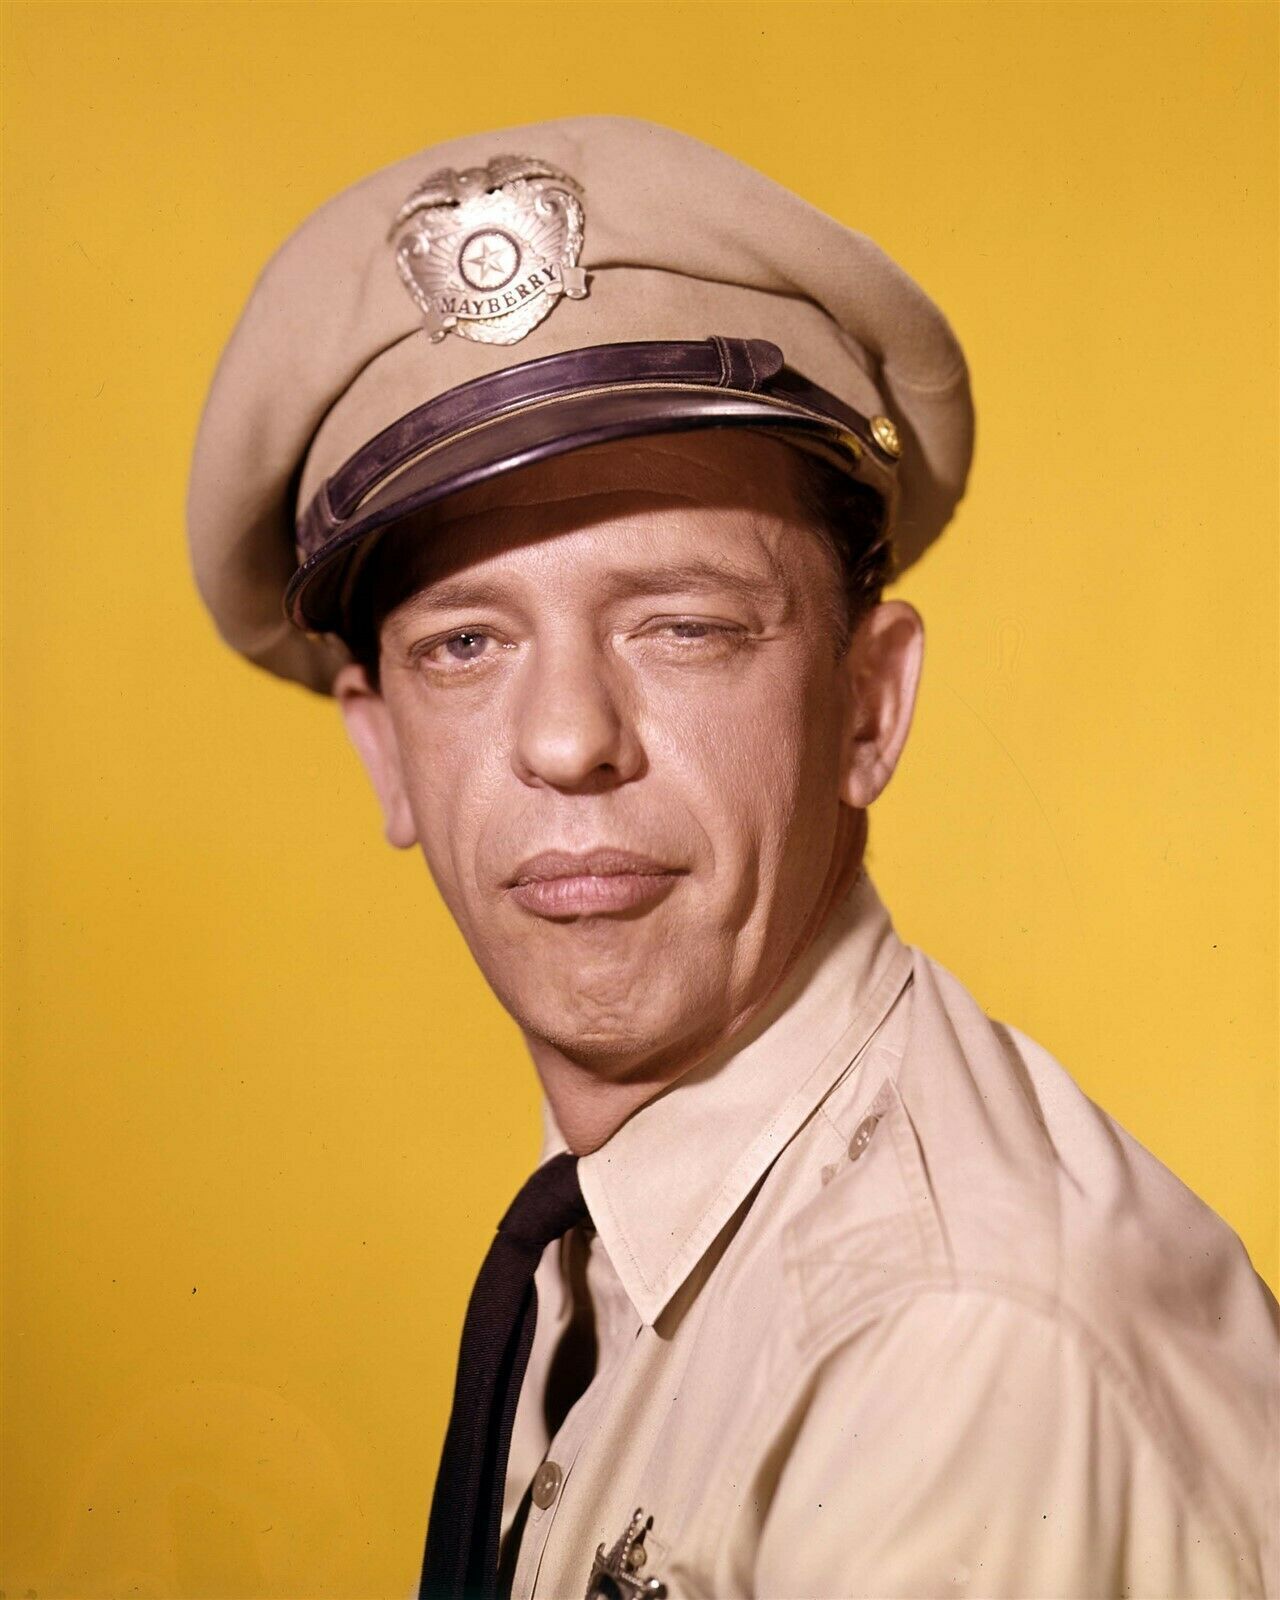 Don Knotts classic Barney Fife in uniform Andy Griffith Show 24x36 inch poster